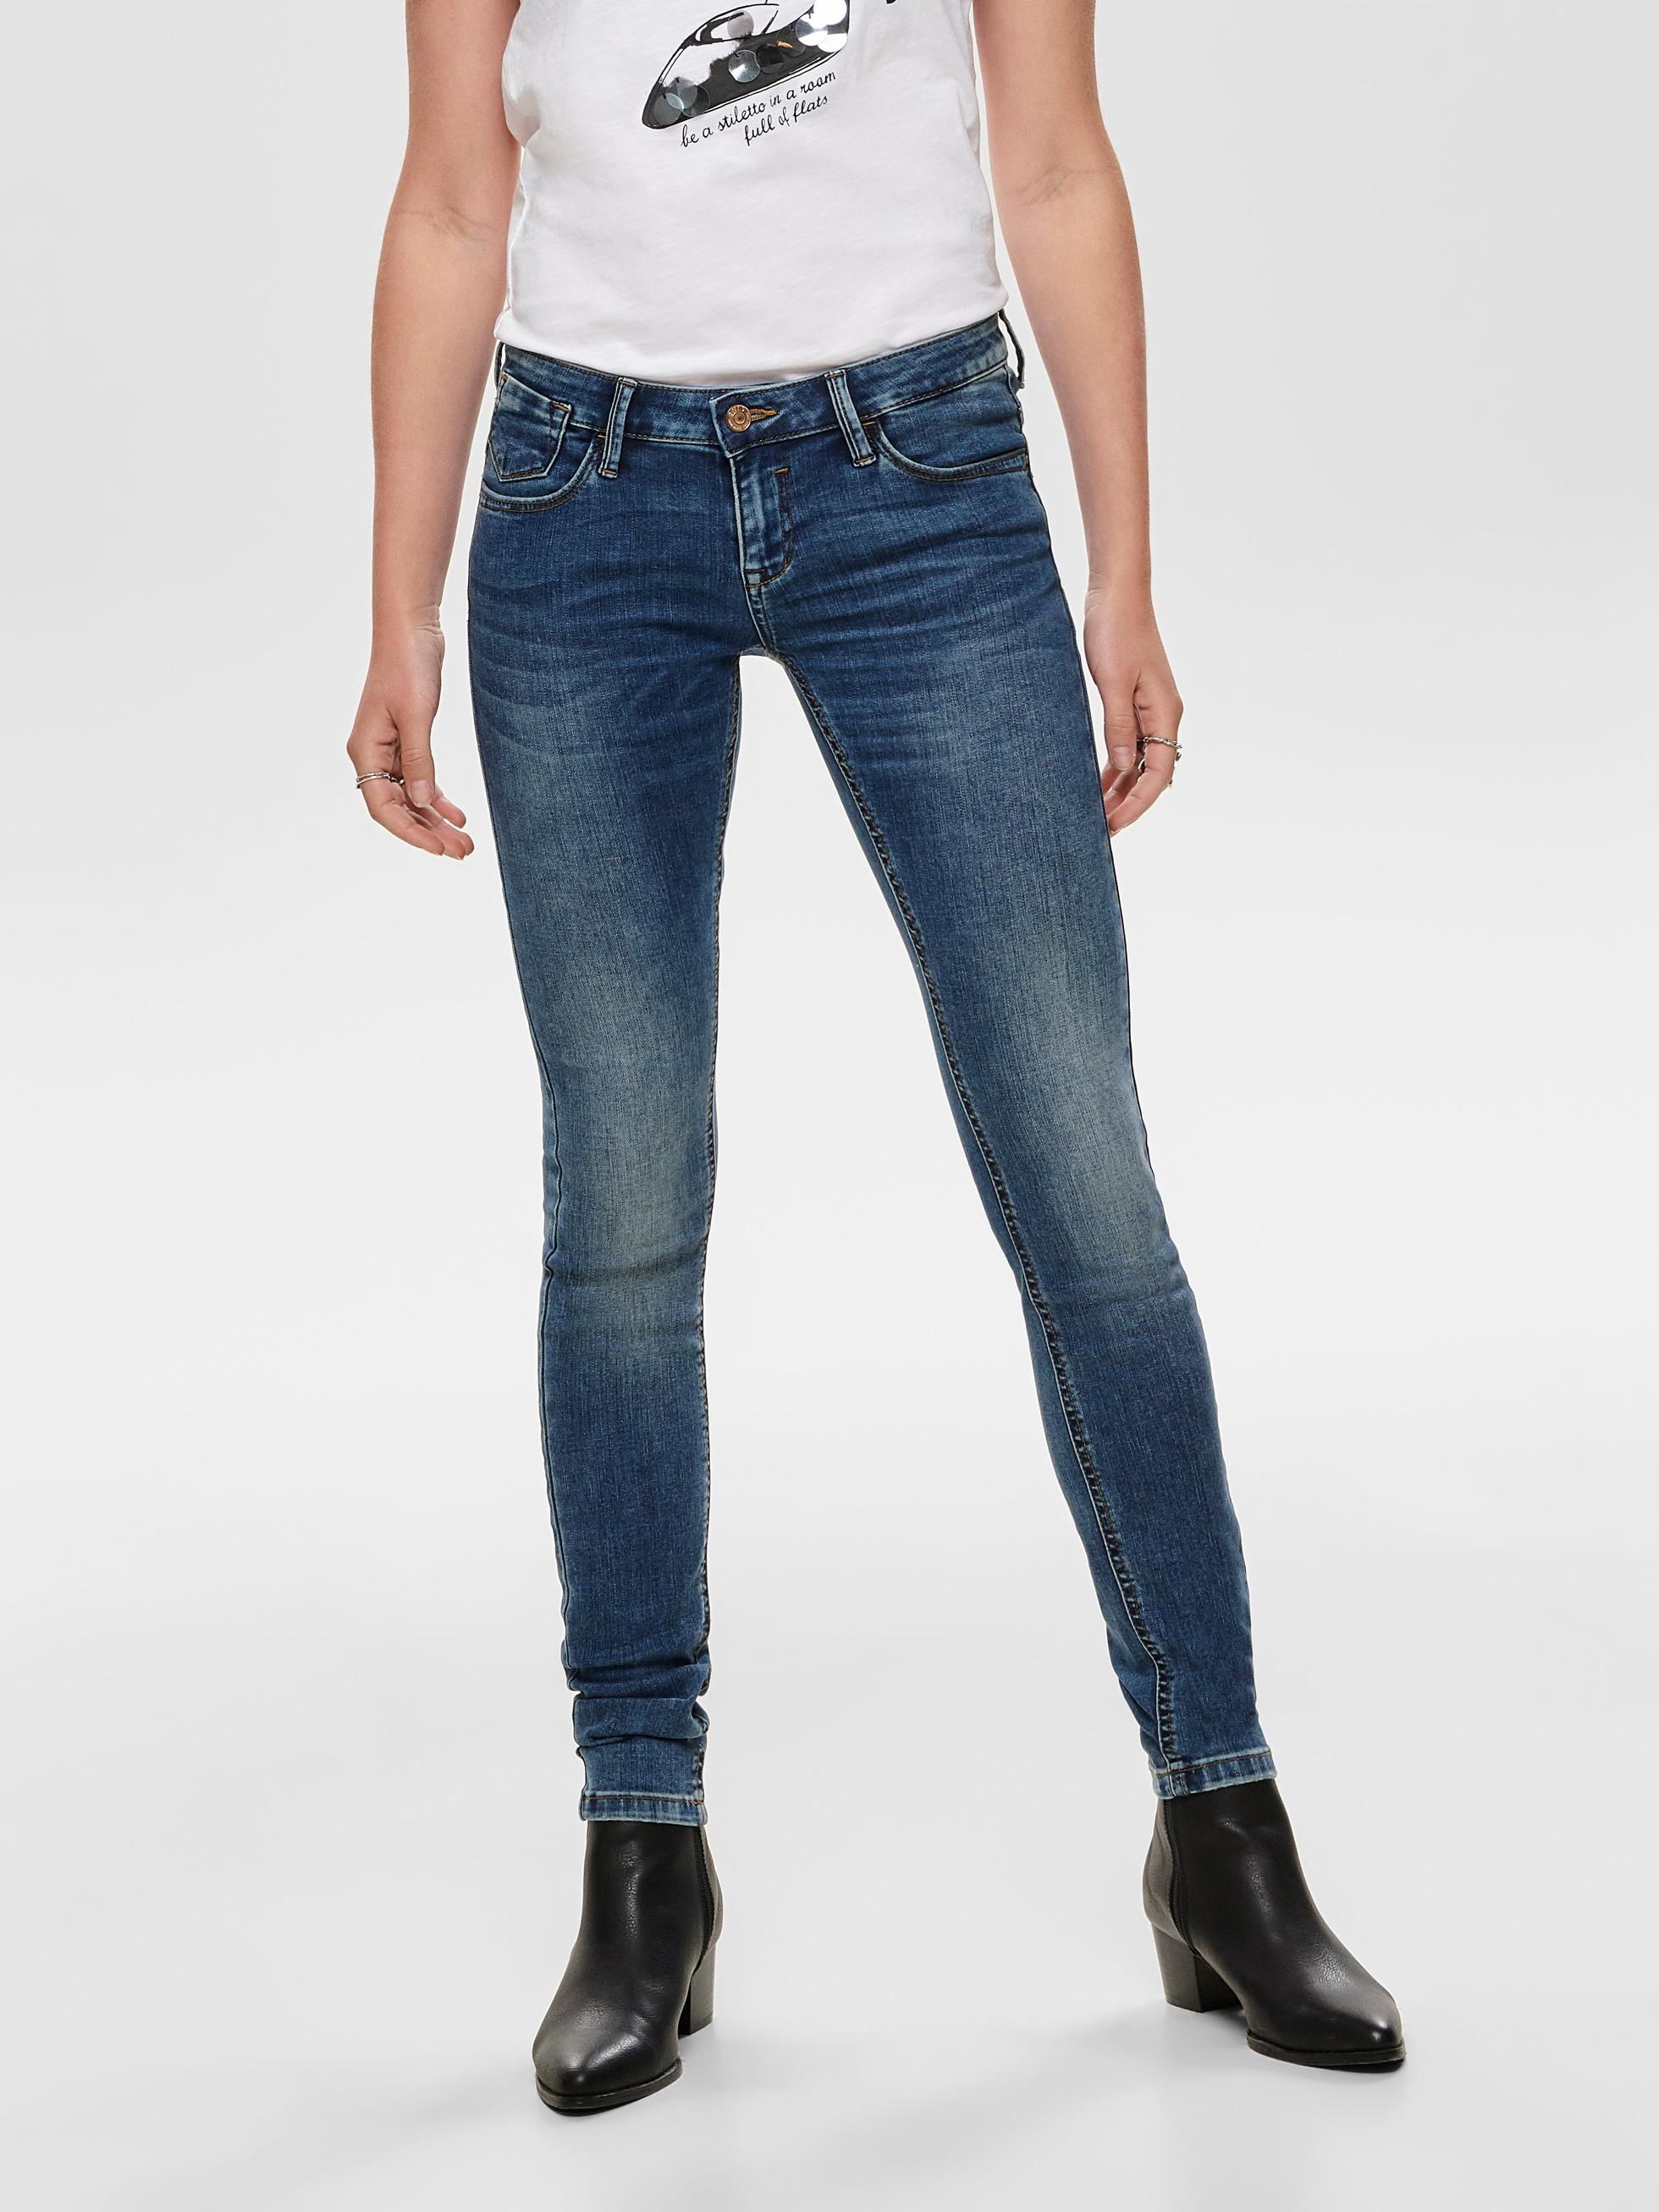 Jeans Skinny Fit Taille extra basse offre à 39,99€ sur ONLY